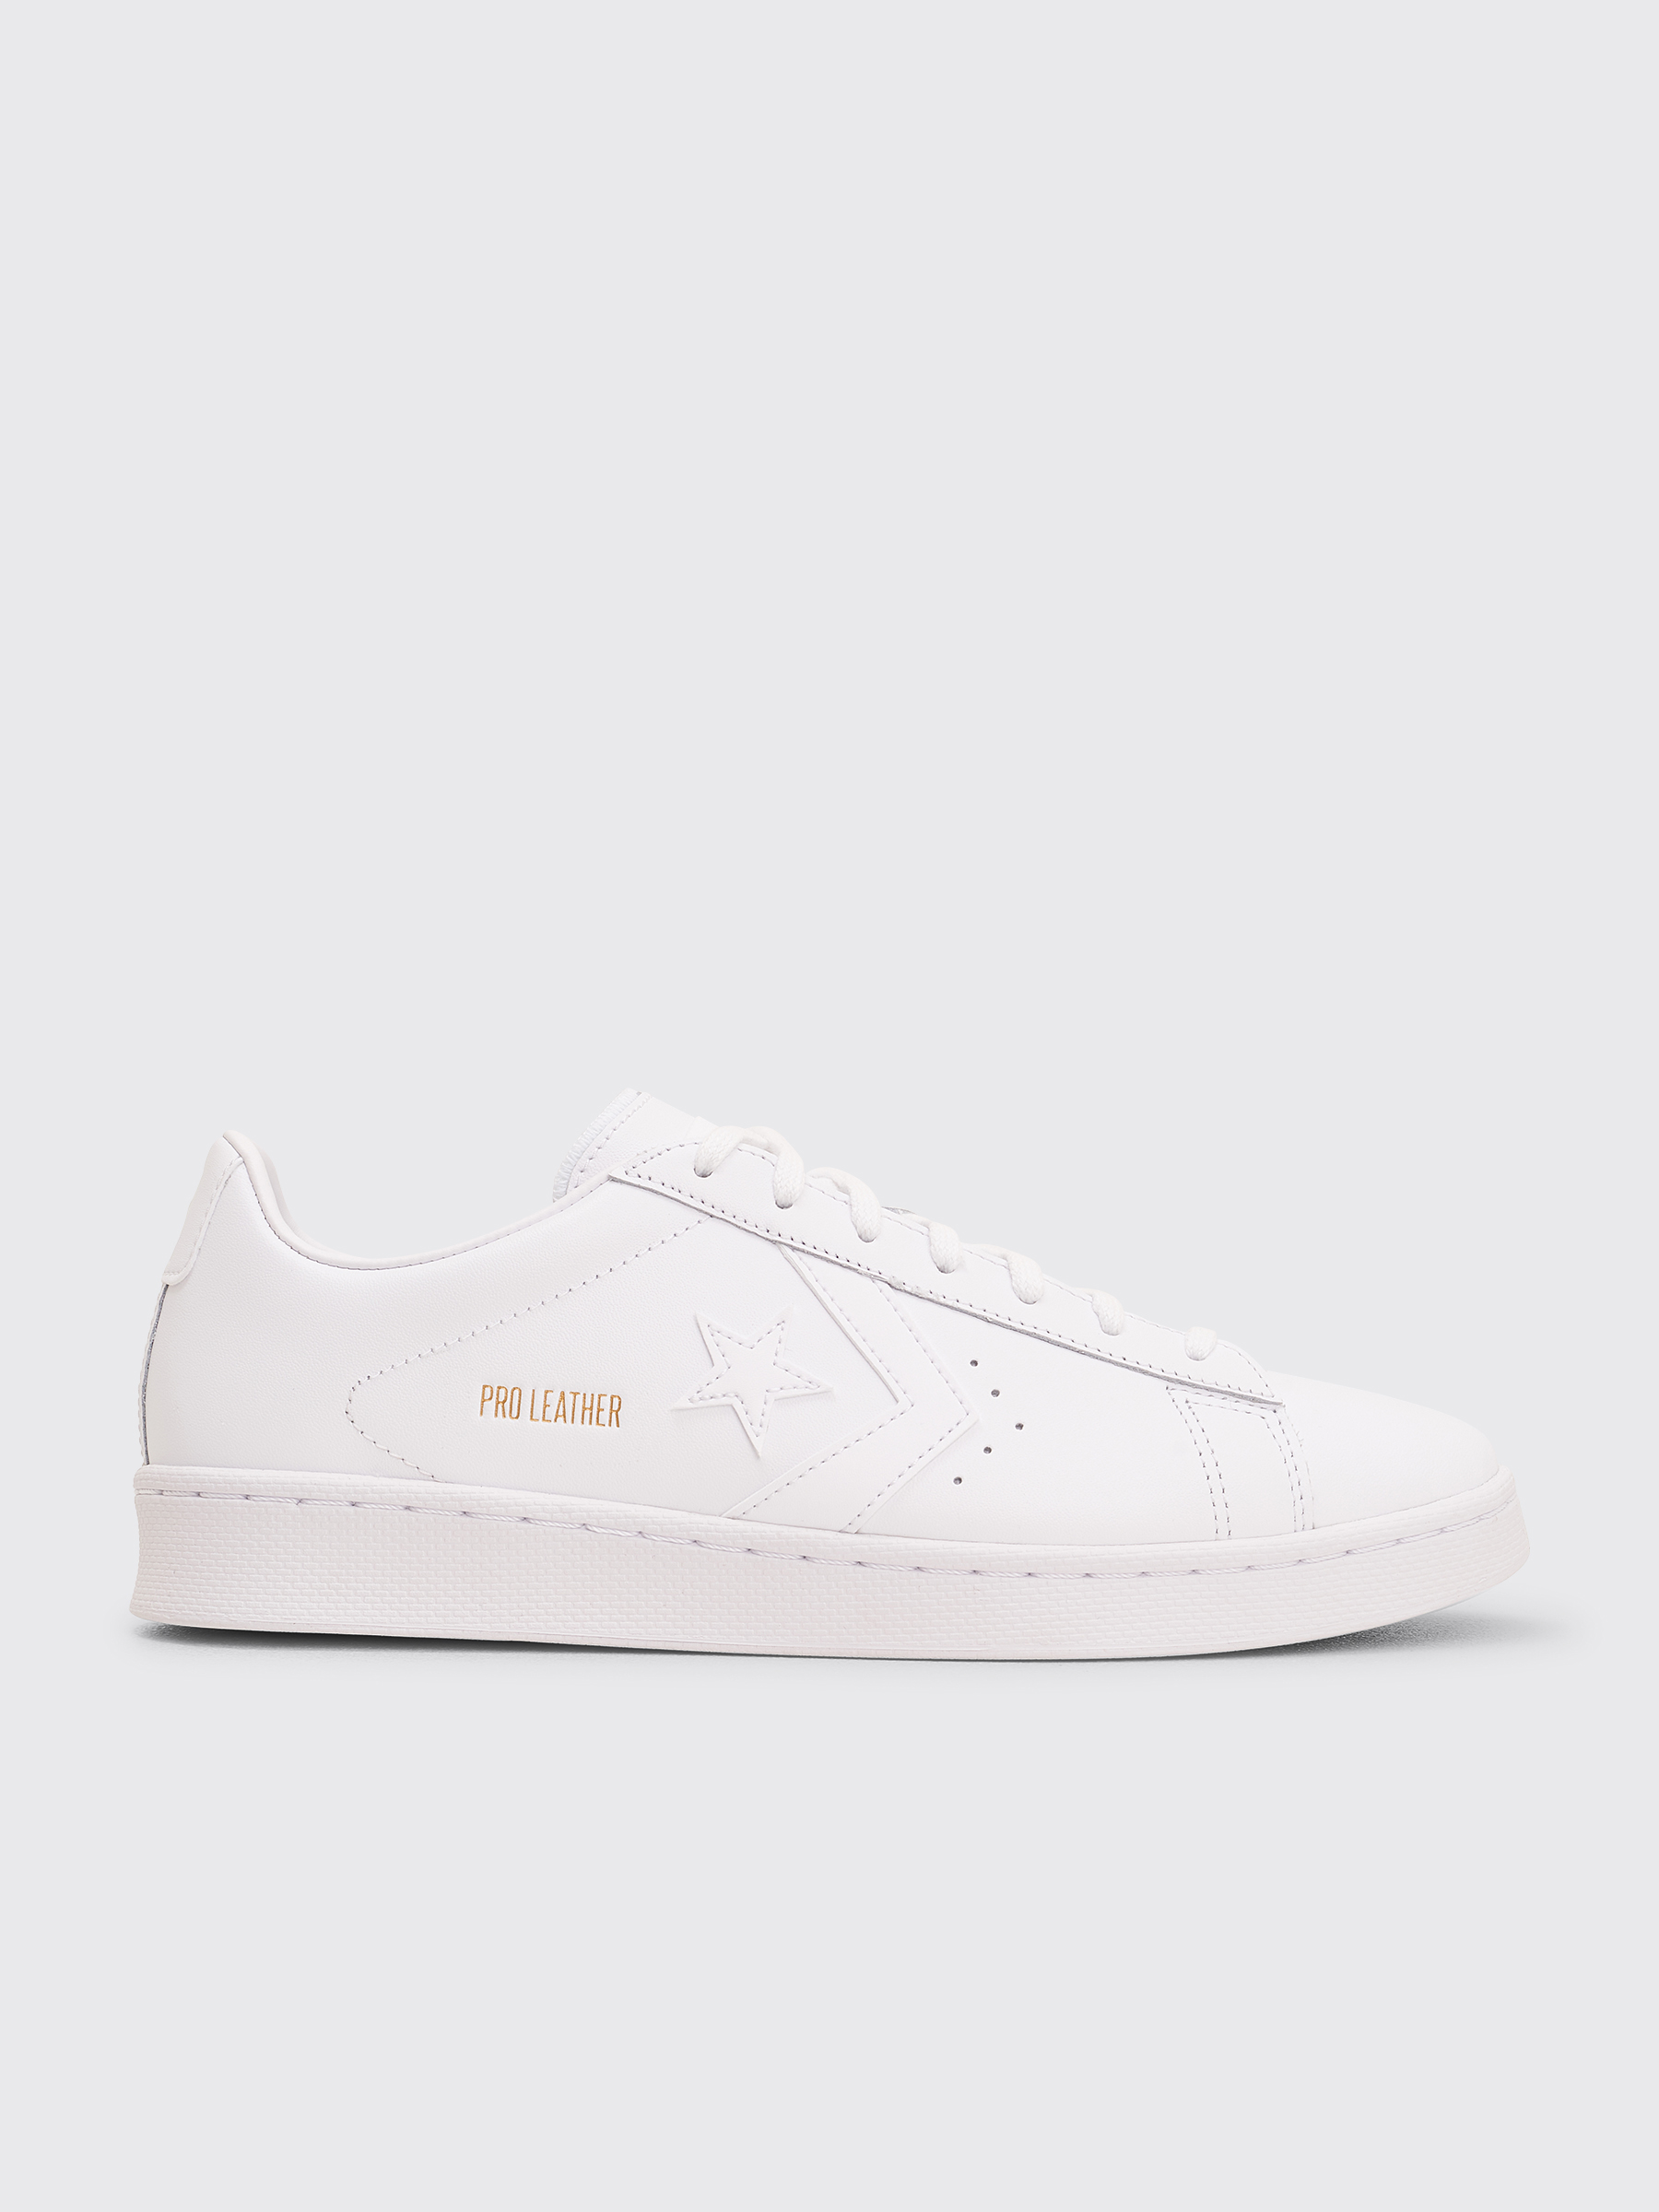 converse leather white